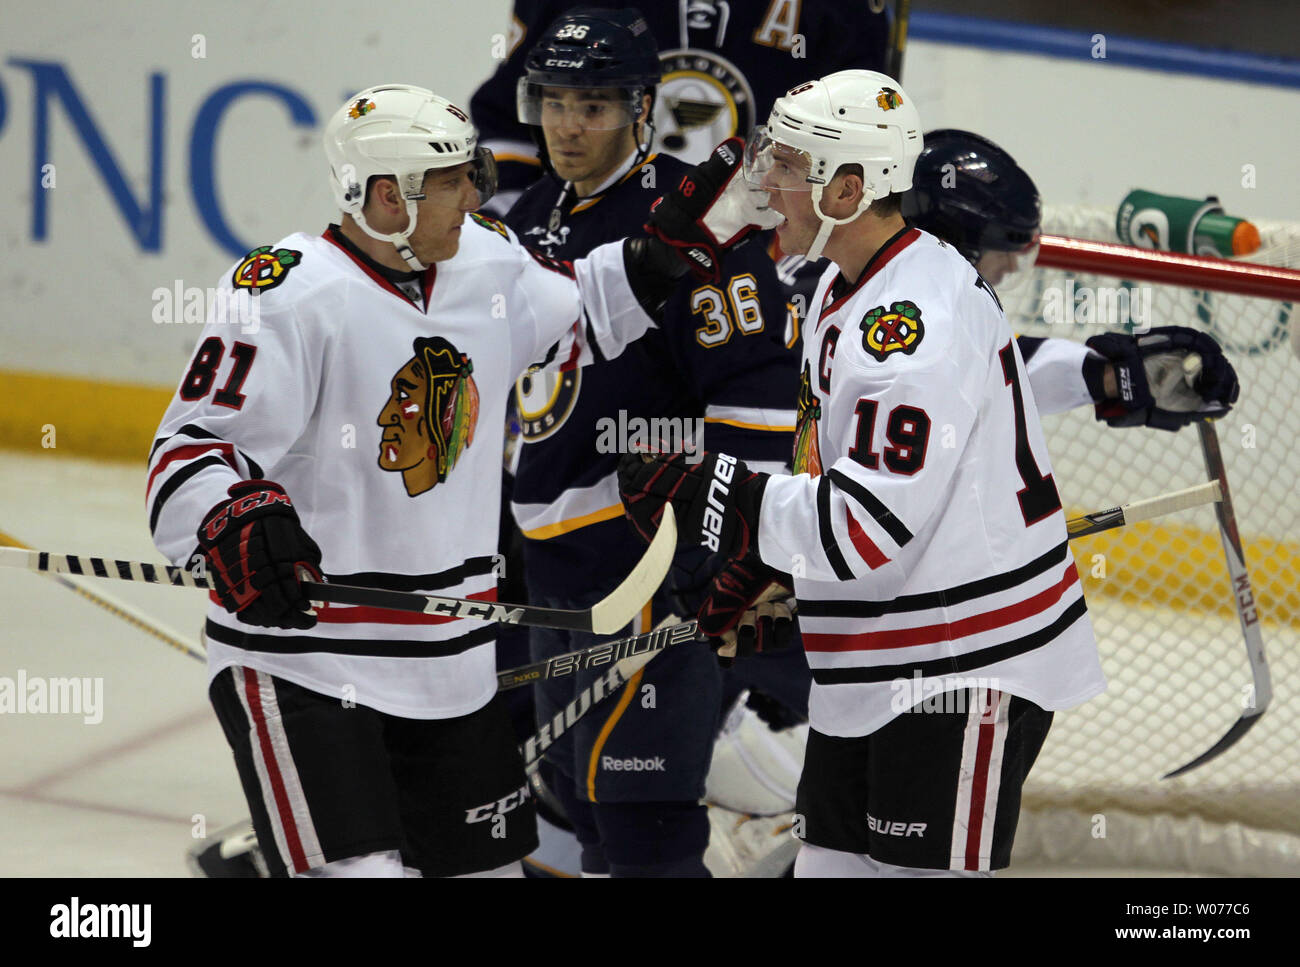 Chicago Blackhawks Jonathan Toews (R) celebrates his second goal of the game with teammate Marian Hossa of Slovakia in the third period at the Scottrade Center in St. Louis on February 28, 2013.  Chicago won the game 3-0. UPI/Bill Greenblatt Stock Photo